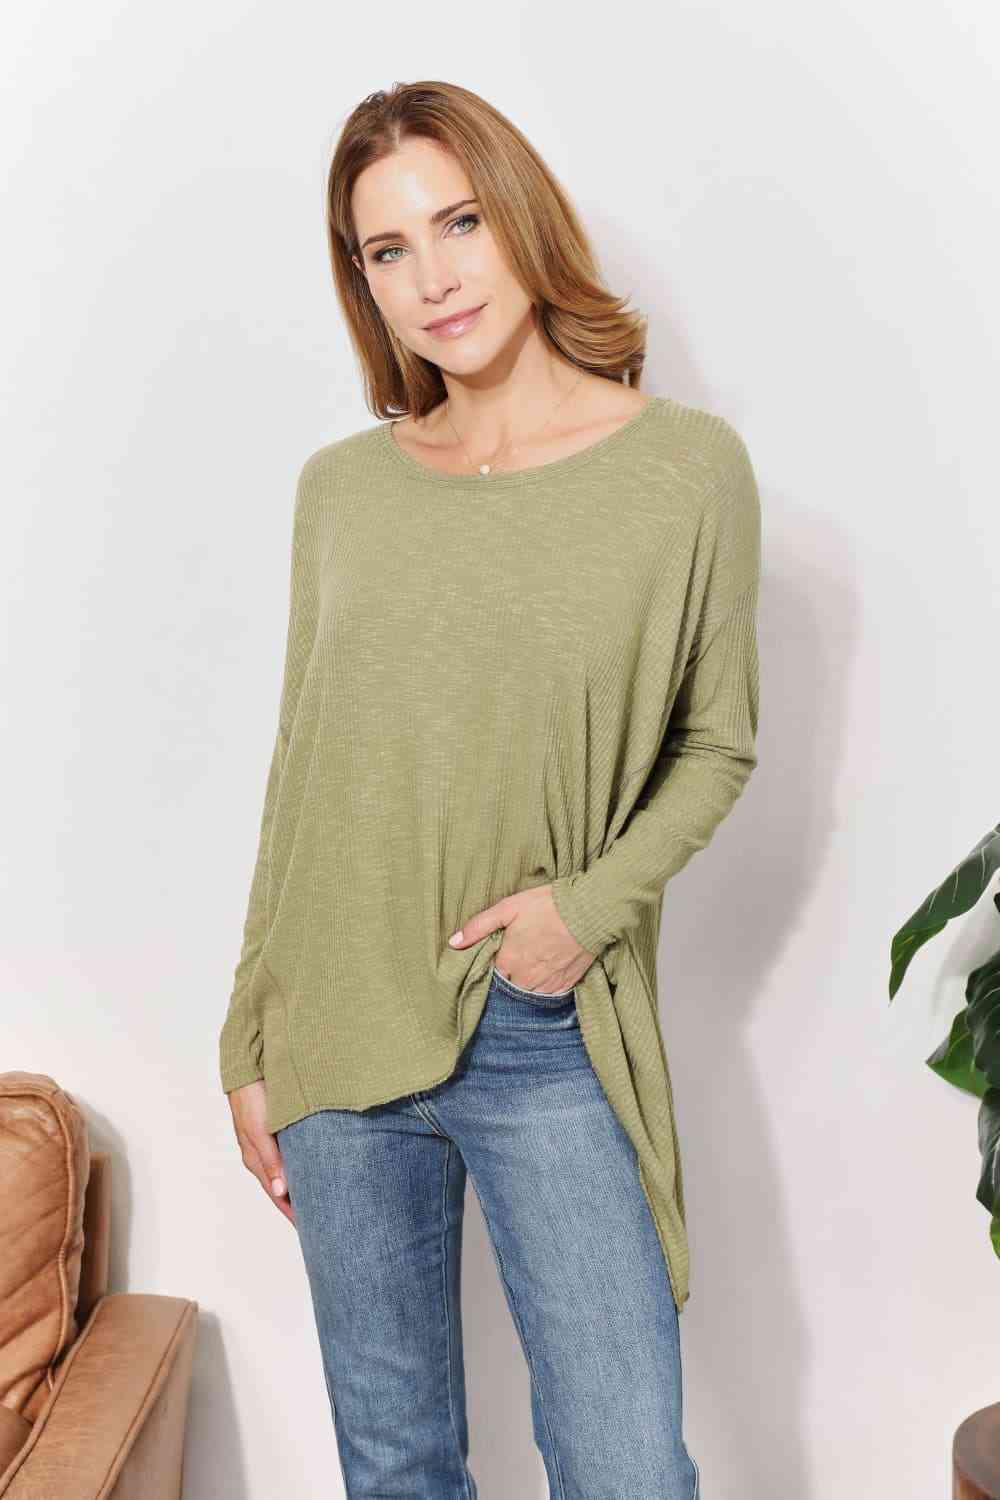 Light Gray HEYSON Full Size Oversized Super Soft Rib Layering Top with a Sharkbite Hem and Round Neck Sentient Beauty Fashions Apparel & Accessories